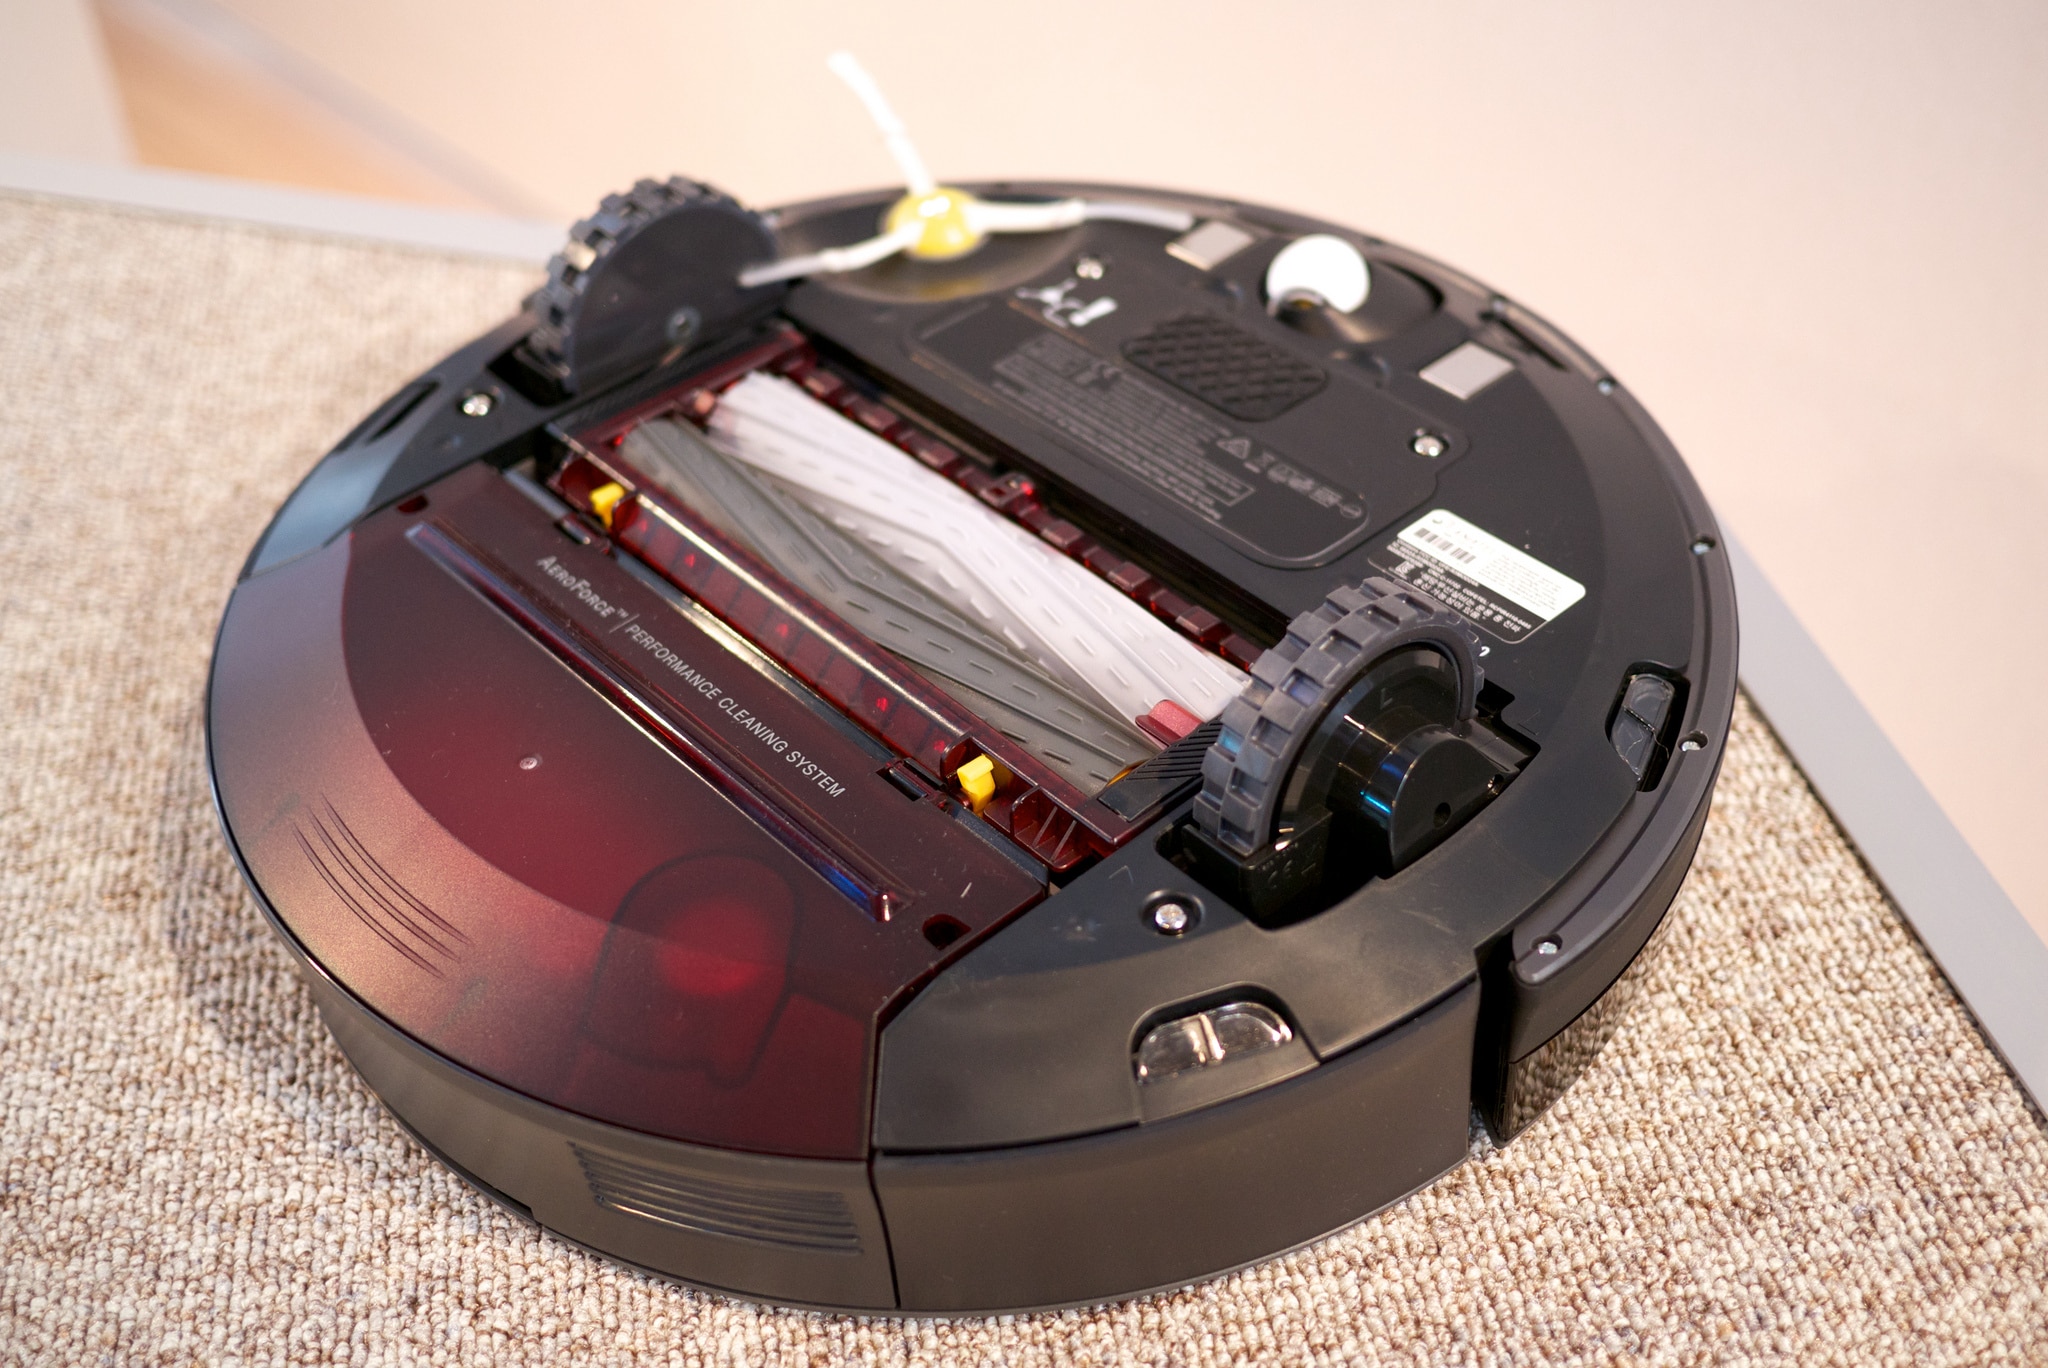 roomba 980, irobot roomba 980, irobot 980, 980, irobot roomba 980 robot vacuum, roomba 990, i roomba 980, new roomba, irobot roomba 980 vacuum cleaning robot, r980020, roomba latest model, roomba reviews